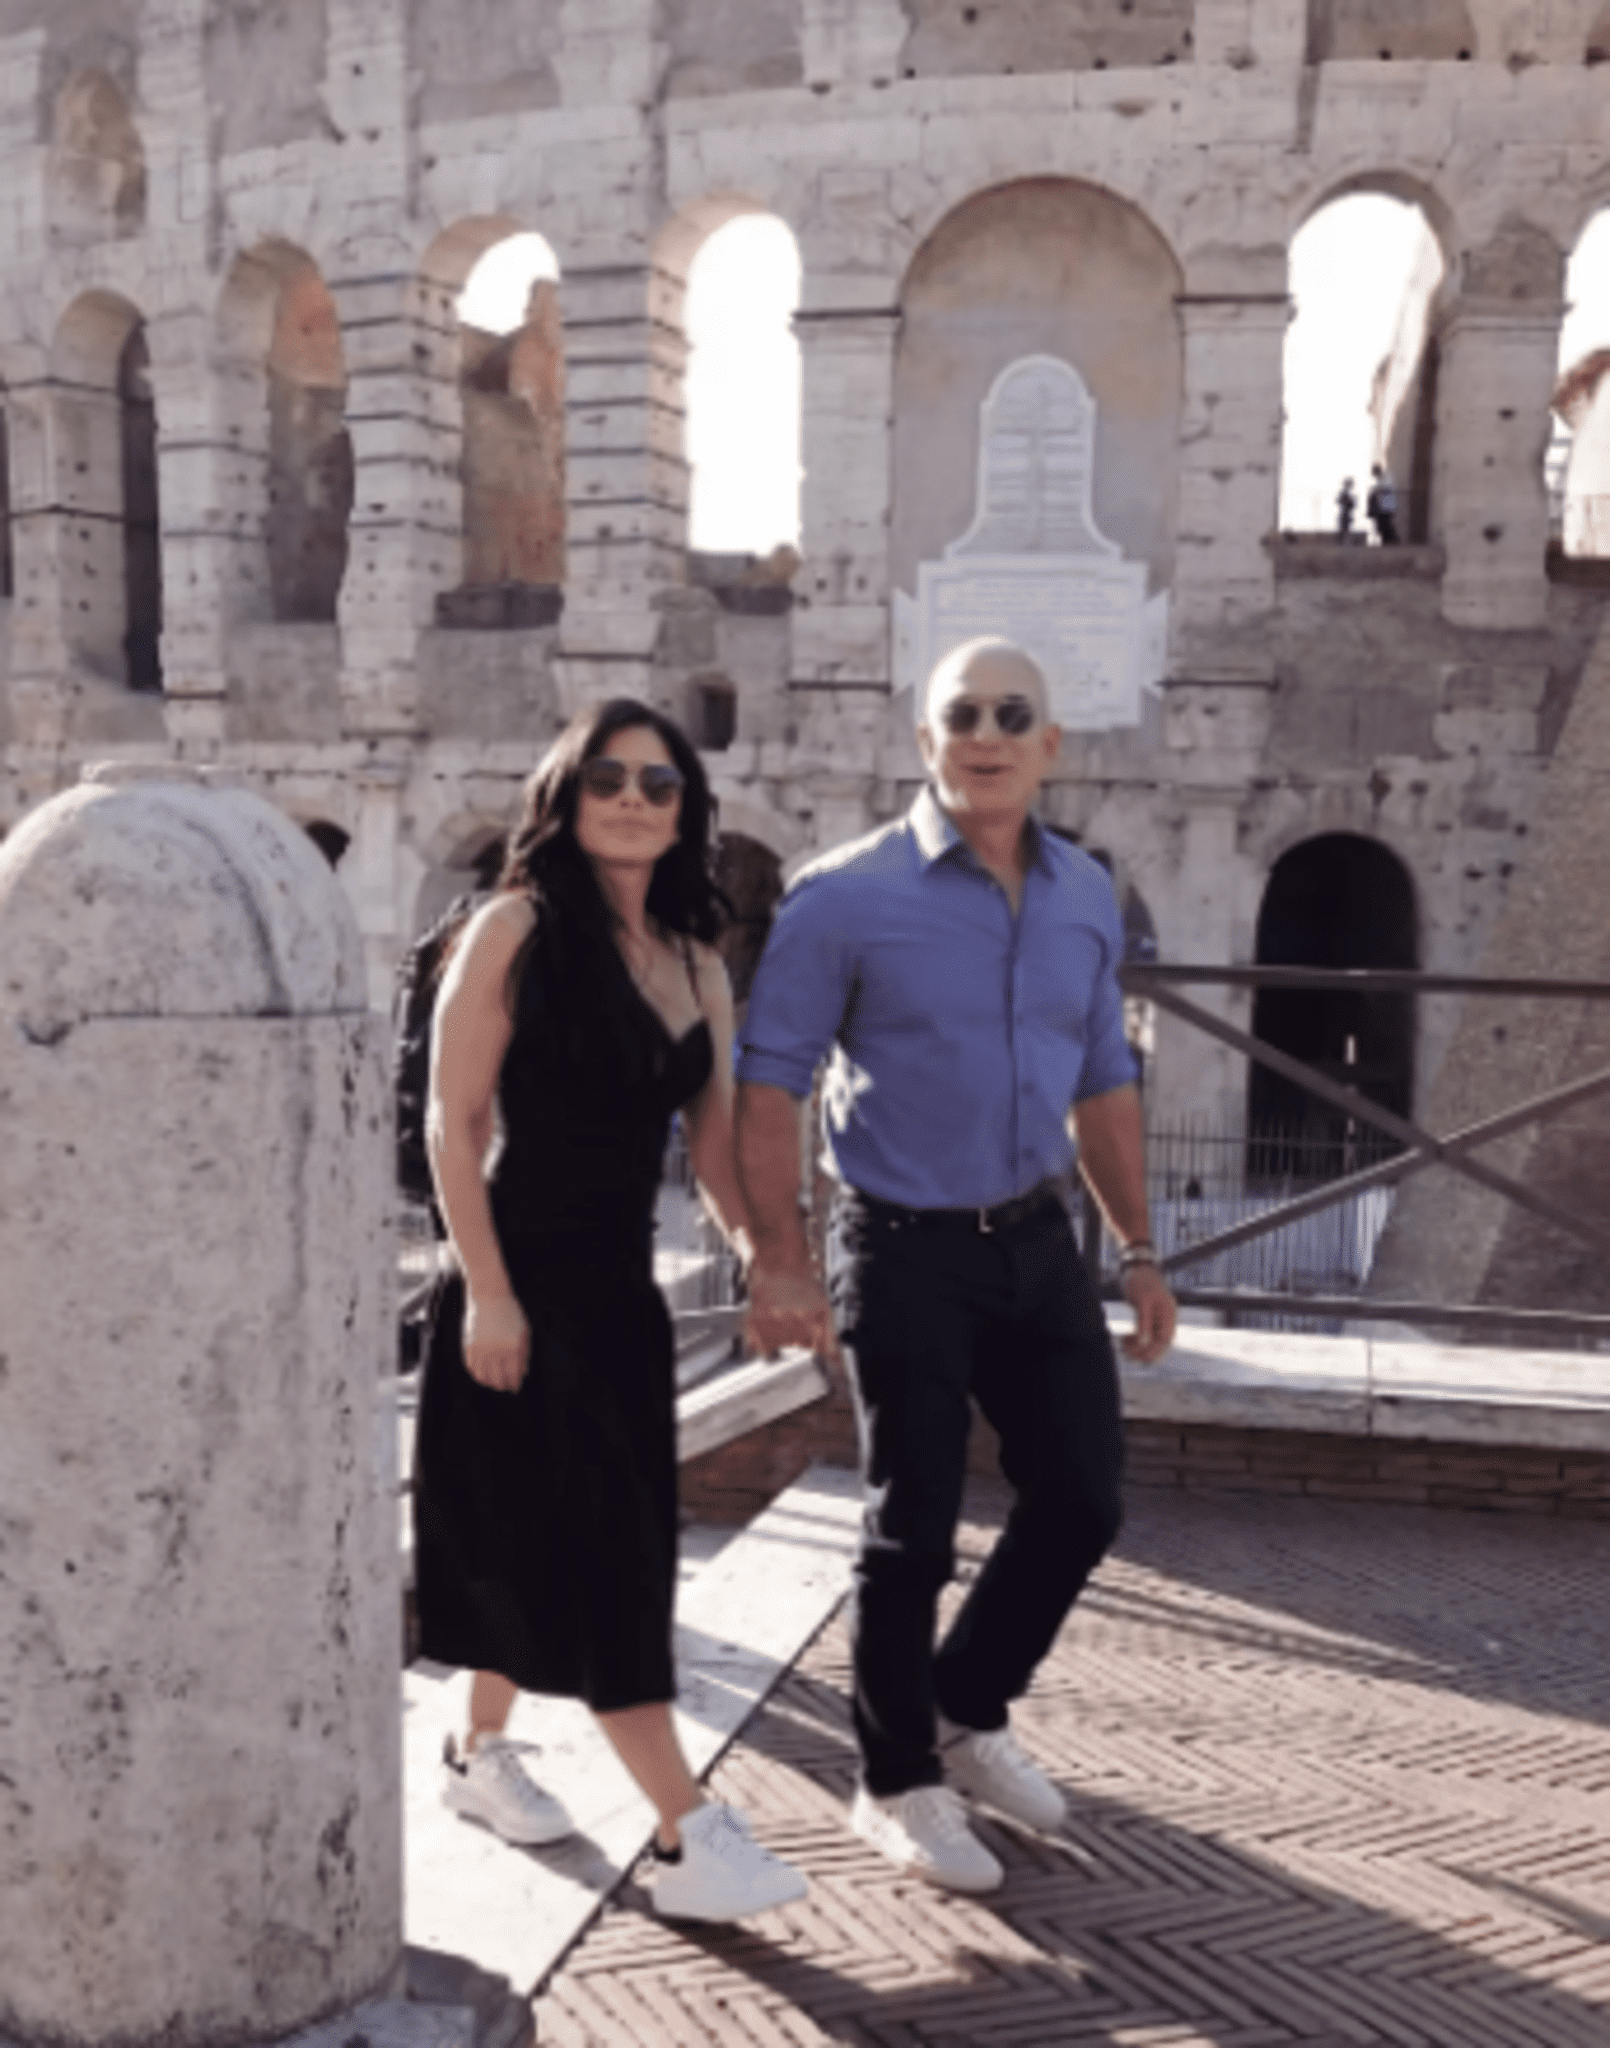 Holding hands at the Colosseum in Rome, Jeff Bezos and Lauren Sánchez appear to be having a good time on their vacation.